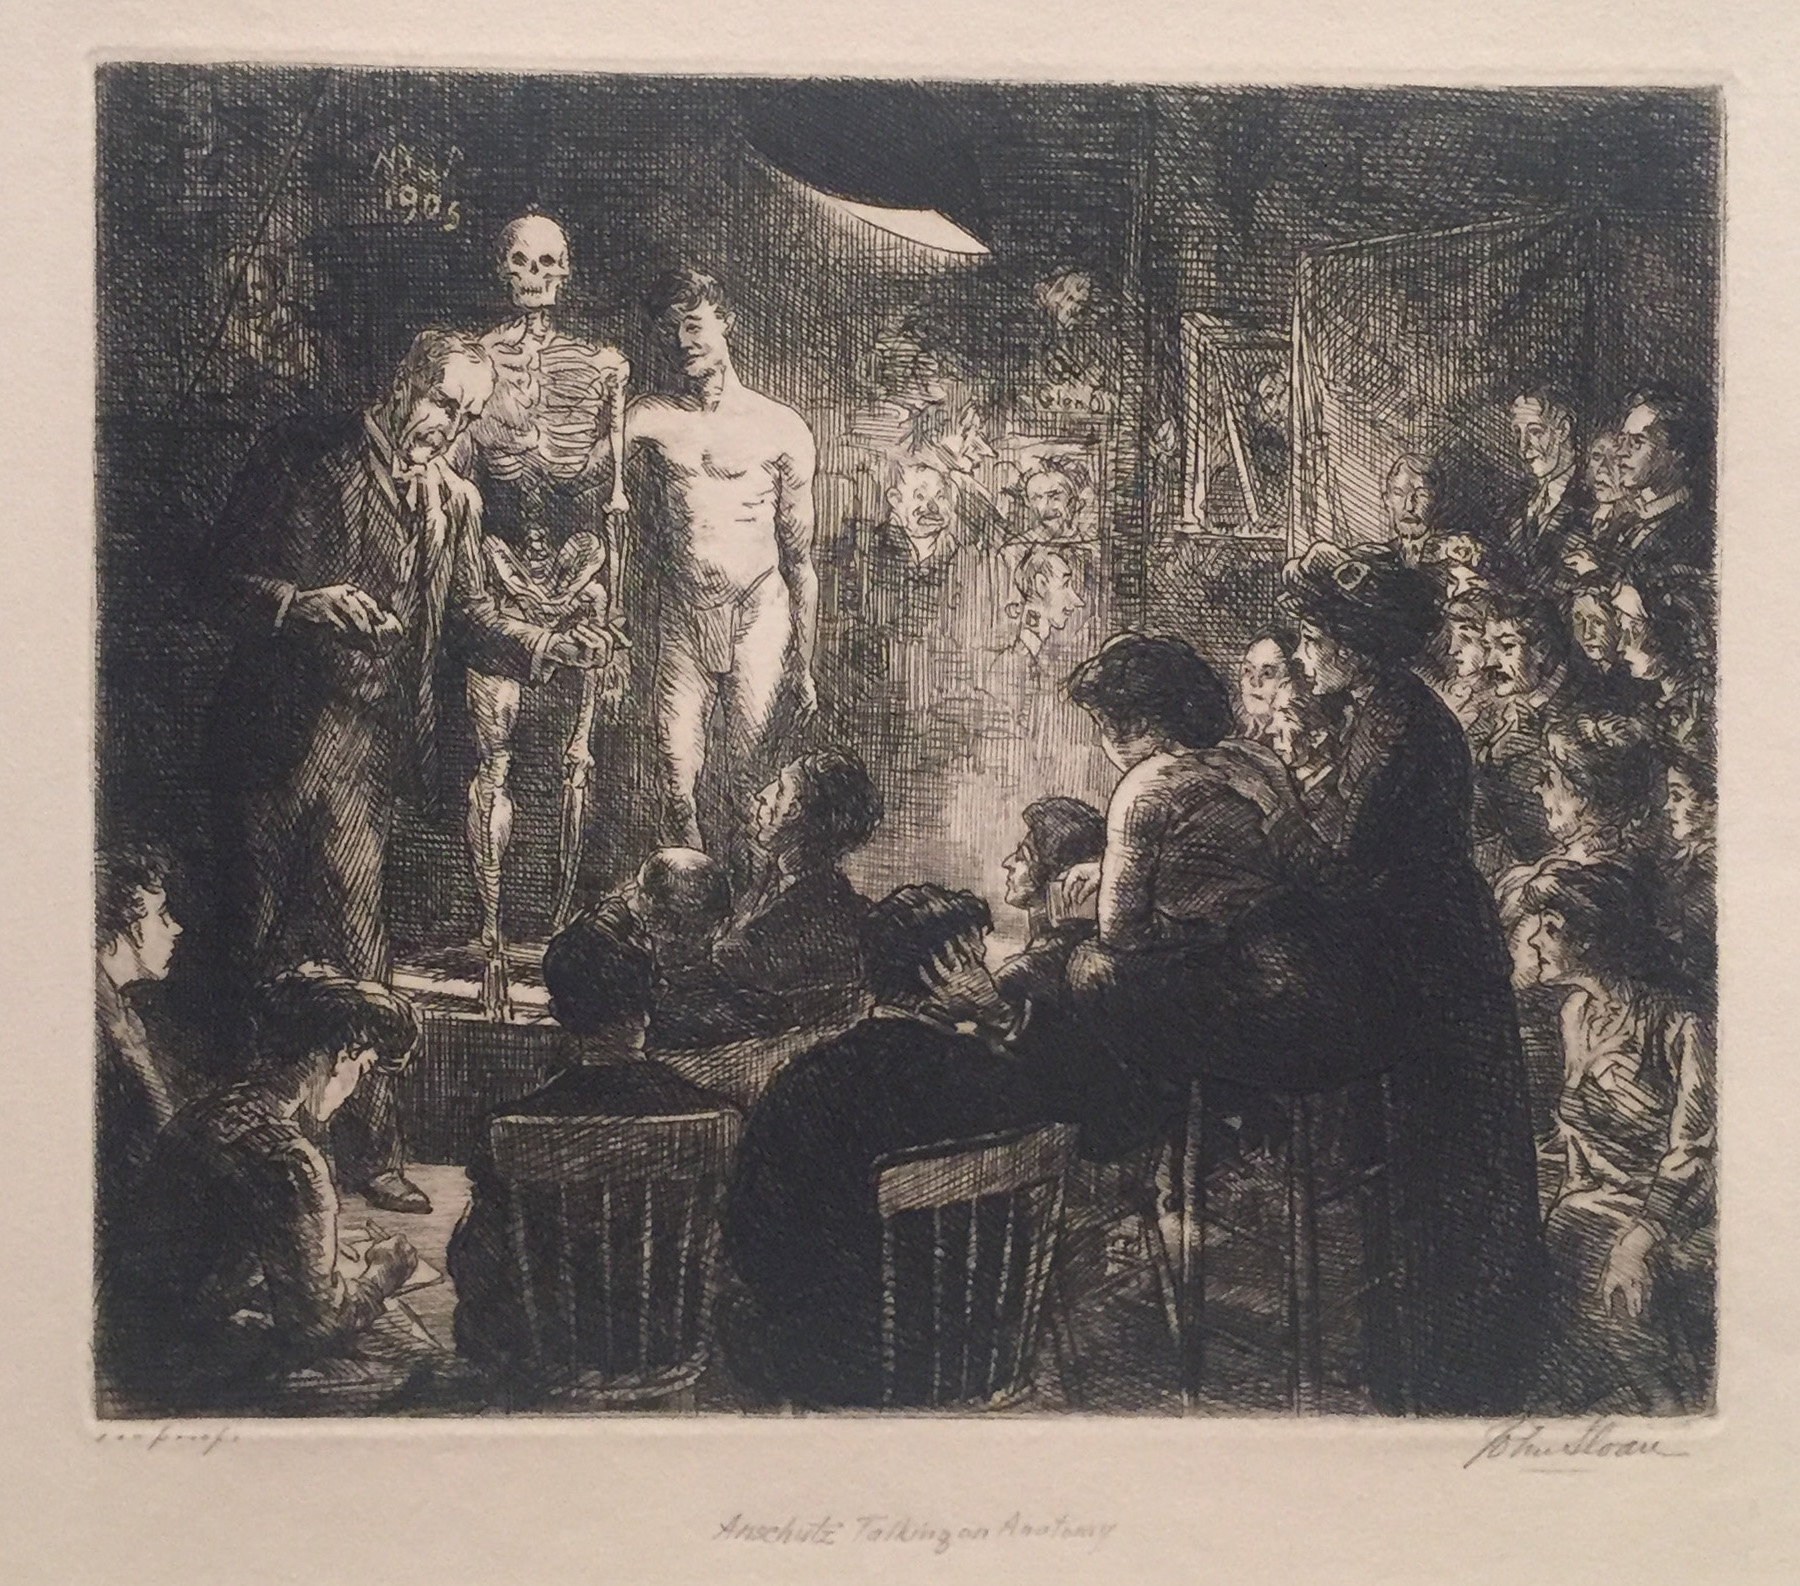 Etching of a man presenting a skeleton and a man in a sheath while a crowd watches